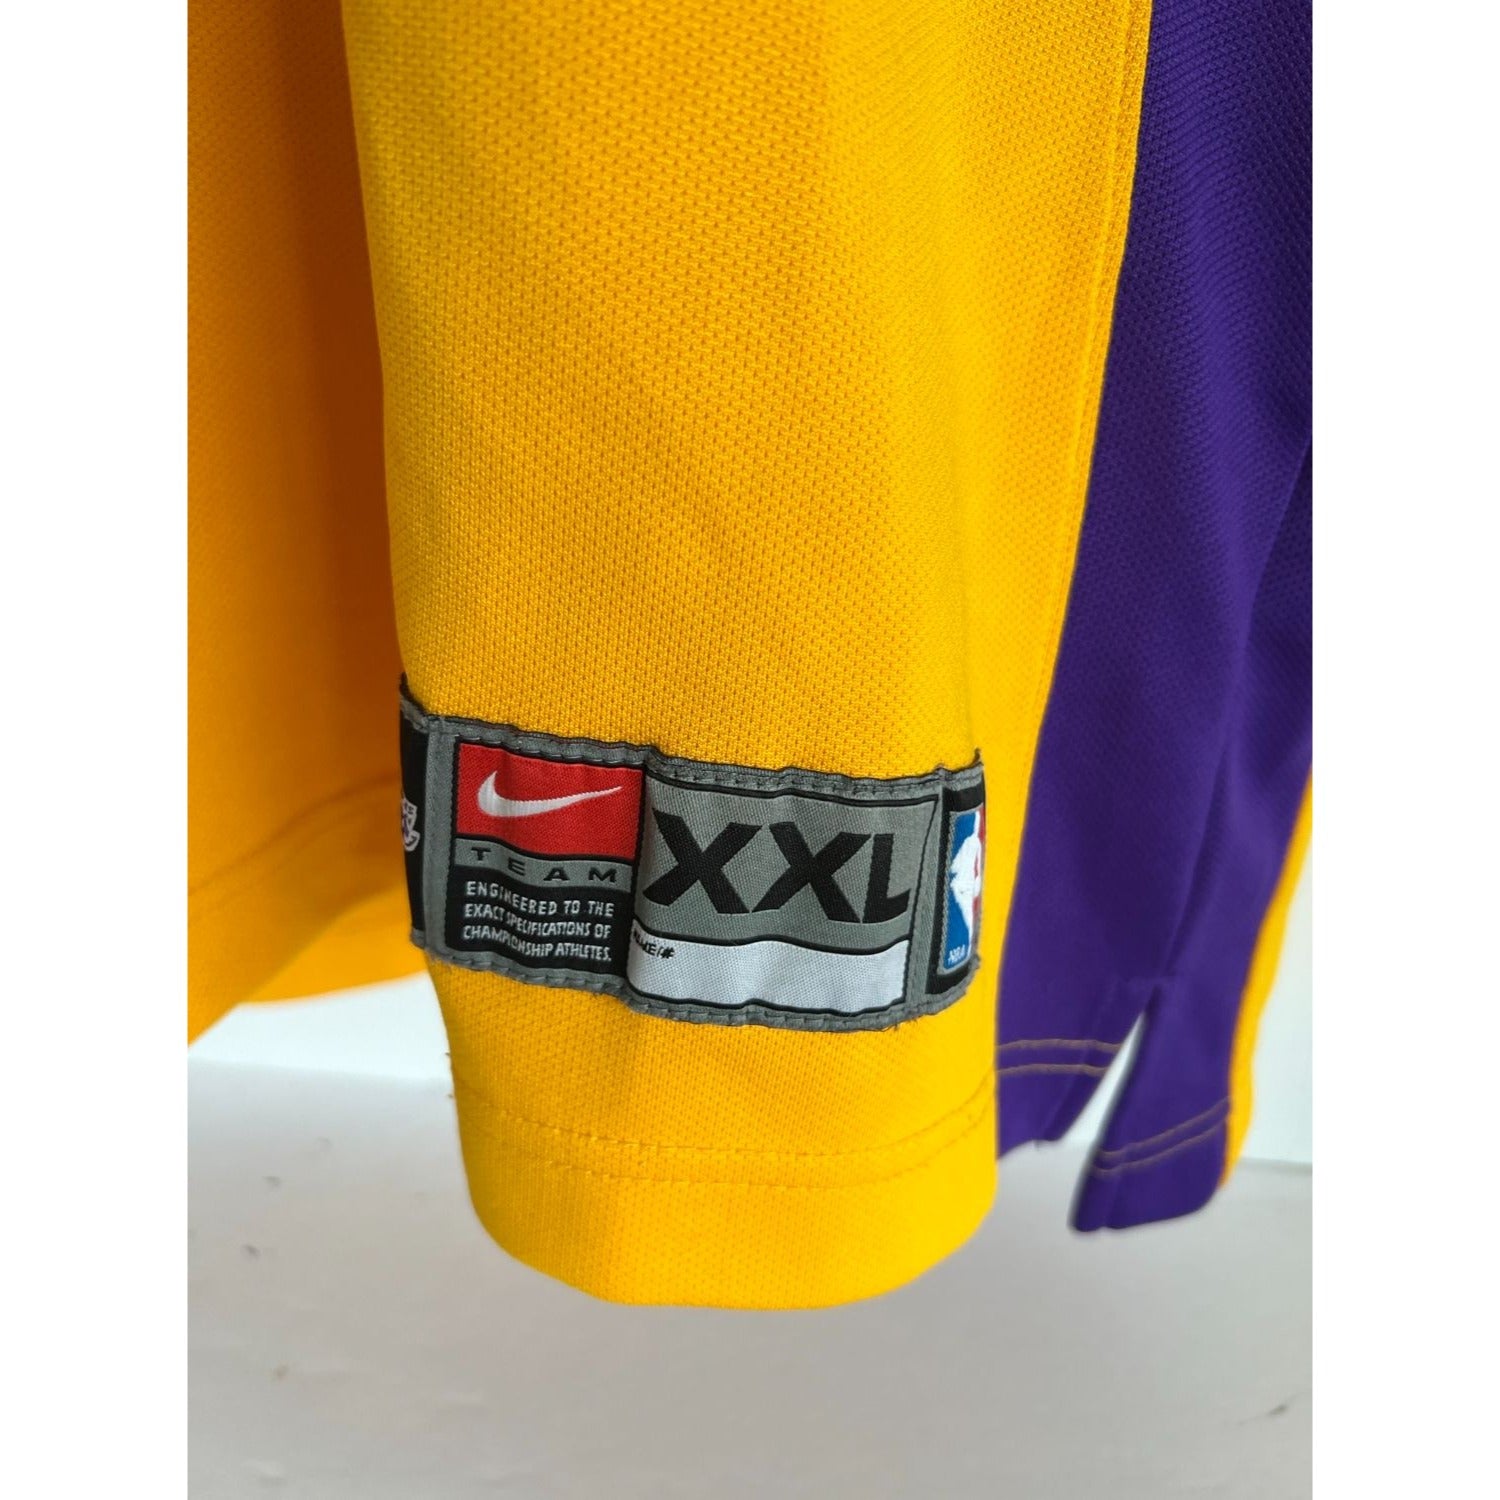 Awesome Artifacts Kobe Bryant Phil Jackson Shaquille O'Neal Los Angeles Lakers 2000 NBA Champions Nike Team Signed Shooting Shirt with Proof by Awesome Artifact